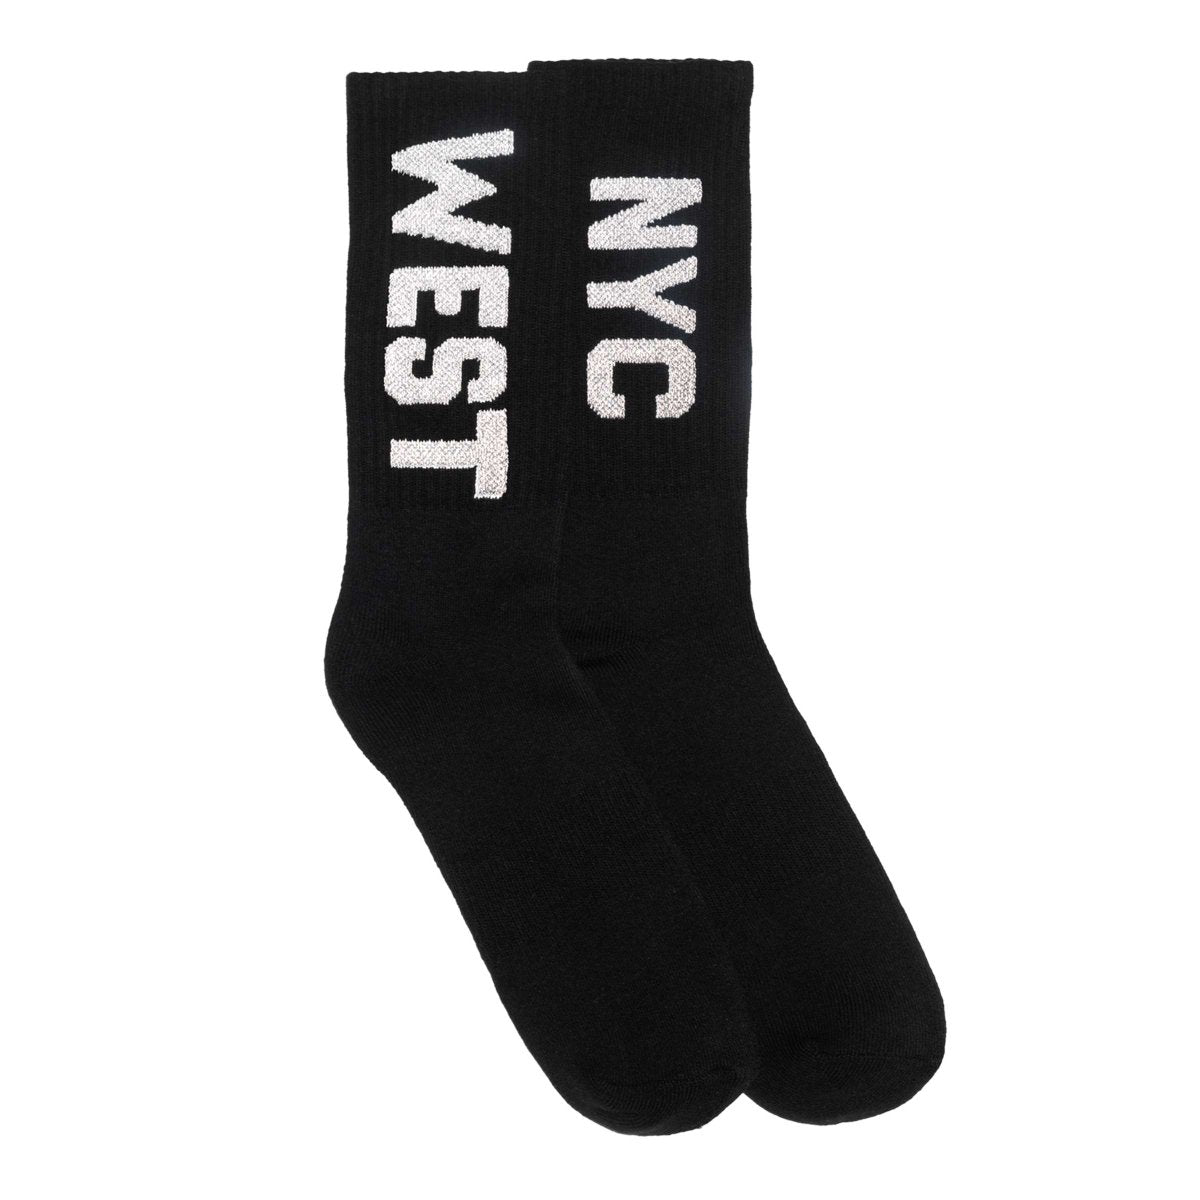 West NYC Spellout Sock Black/Reflective - 10042996 - West NYC